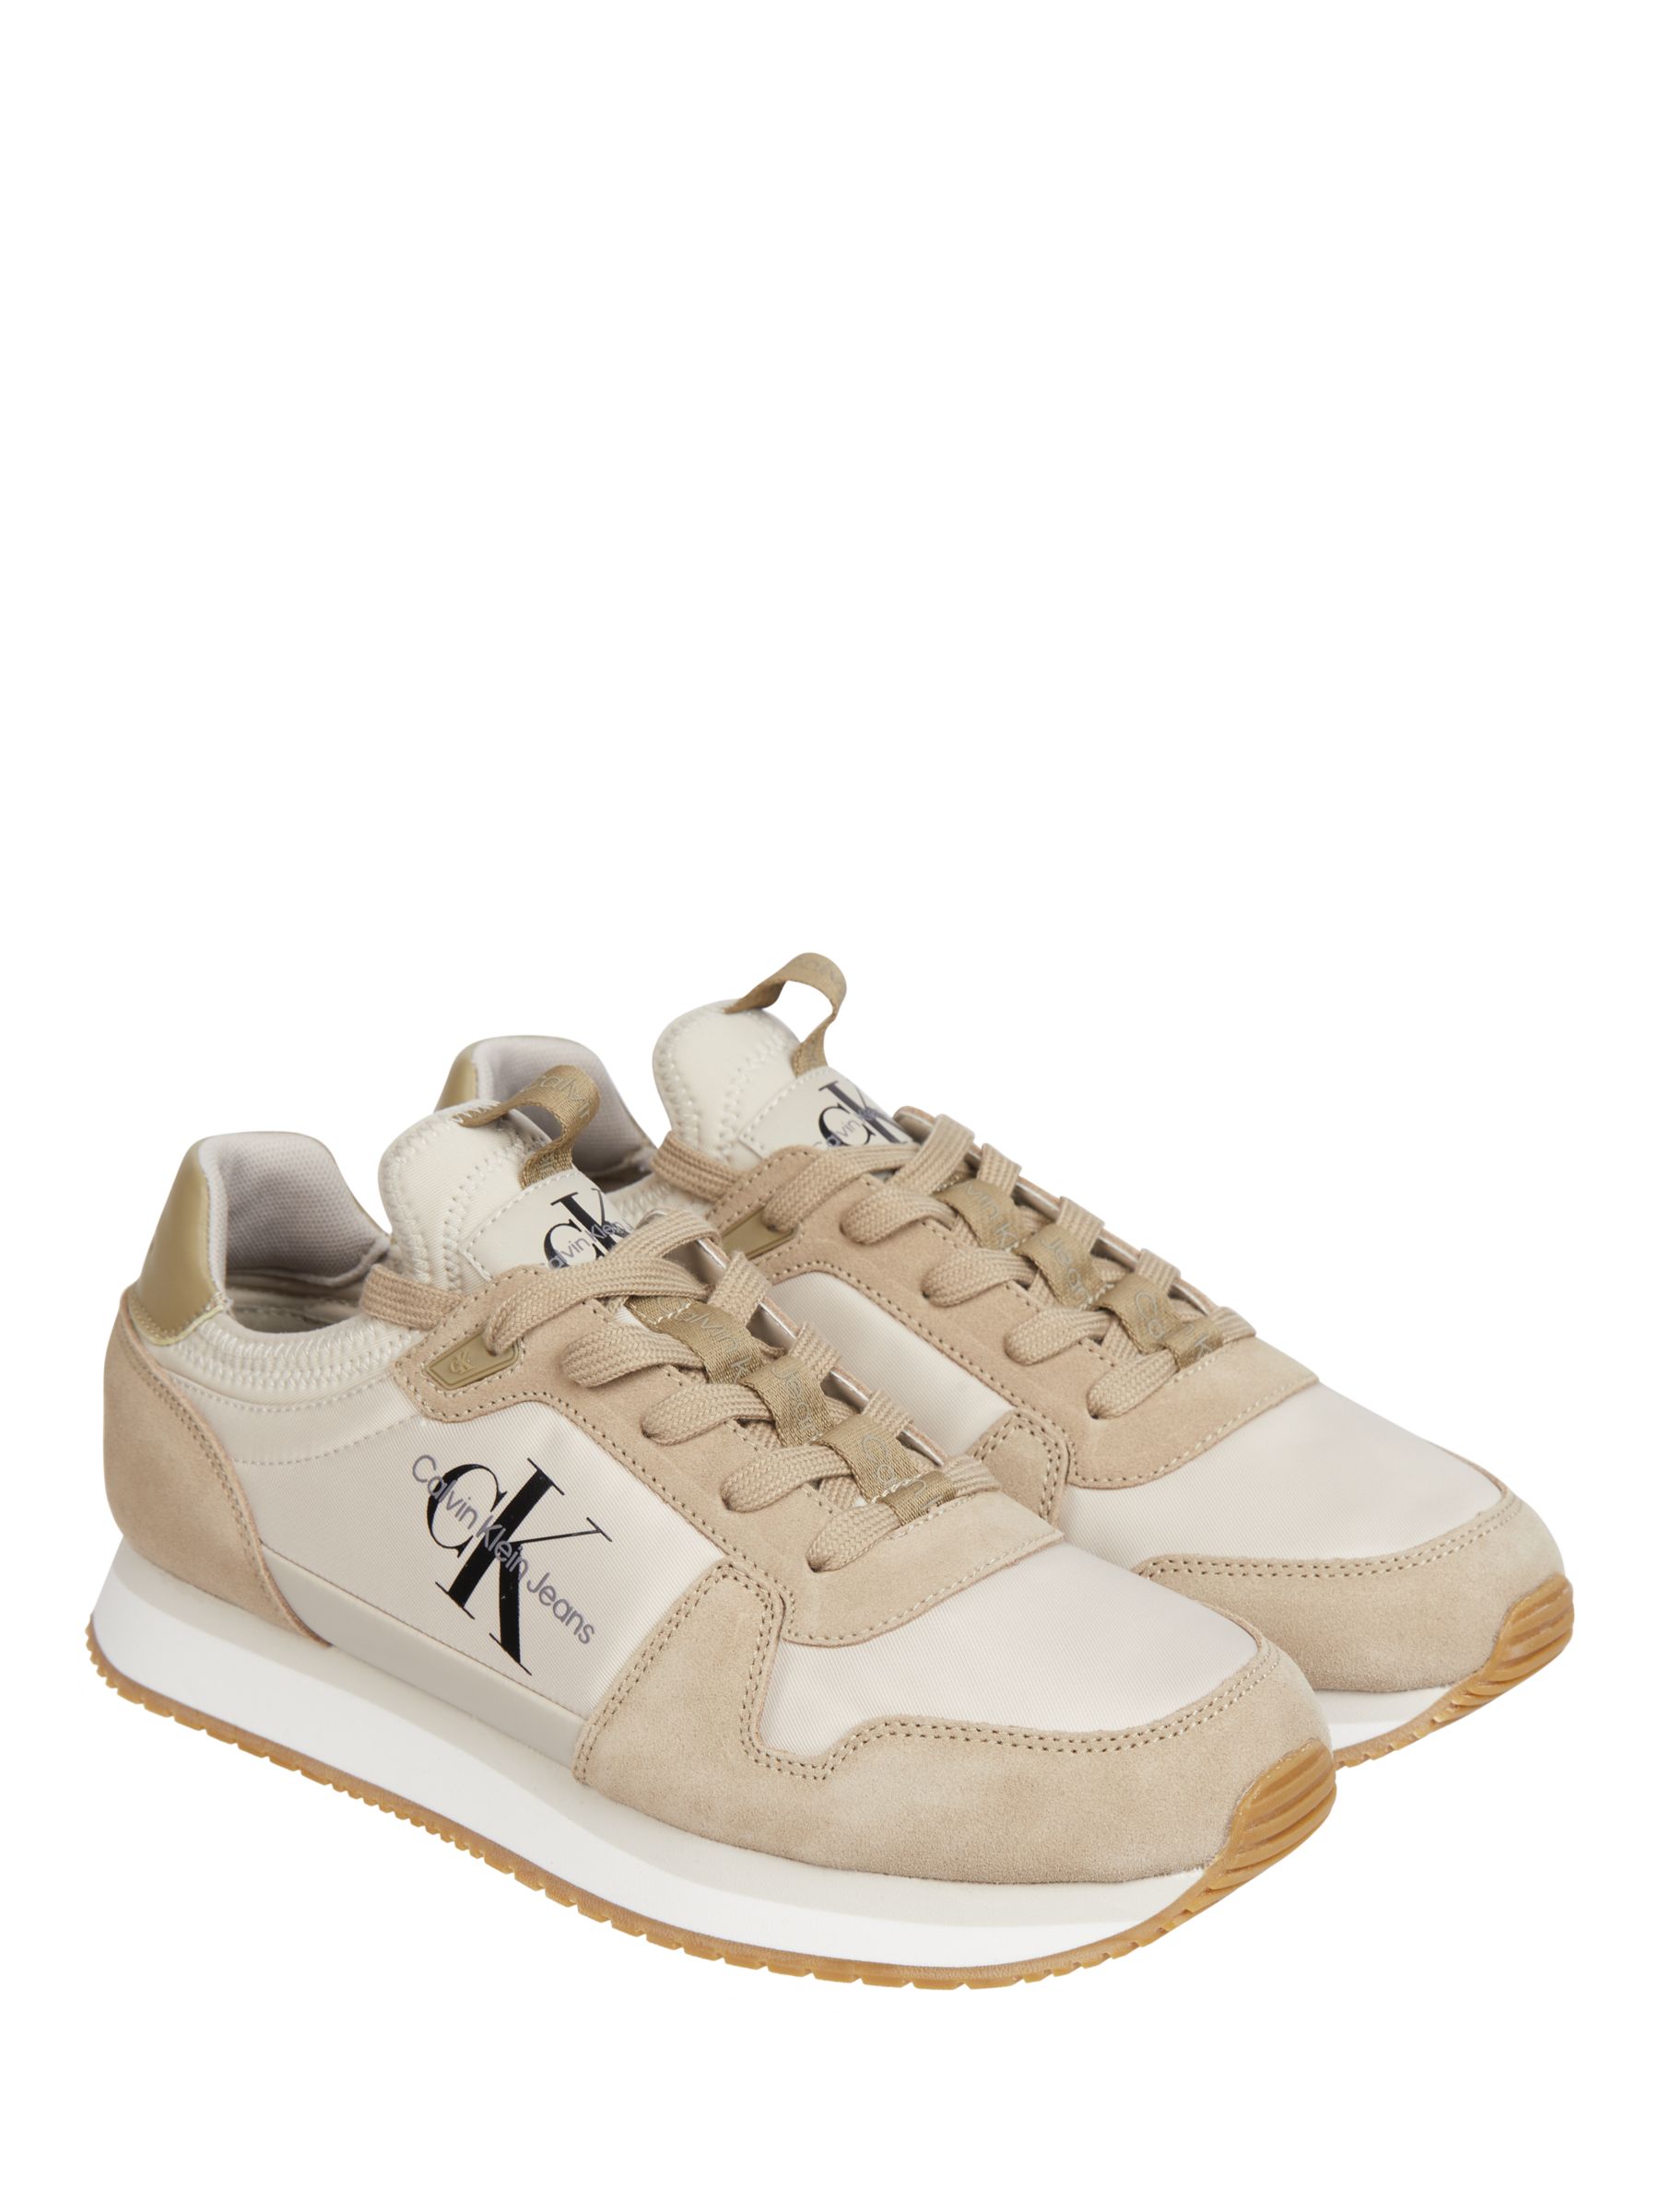 Calvin Klein Suede Lace Up Runner Trainers, Eggshell/Travertine, 6